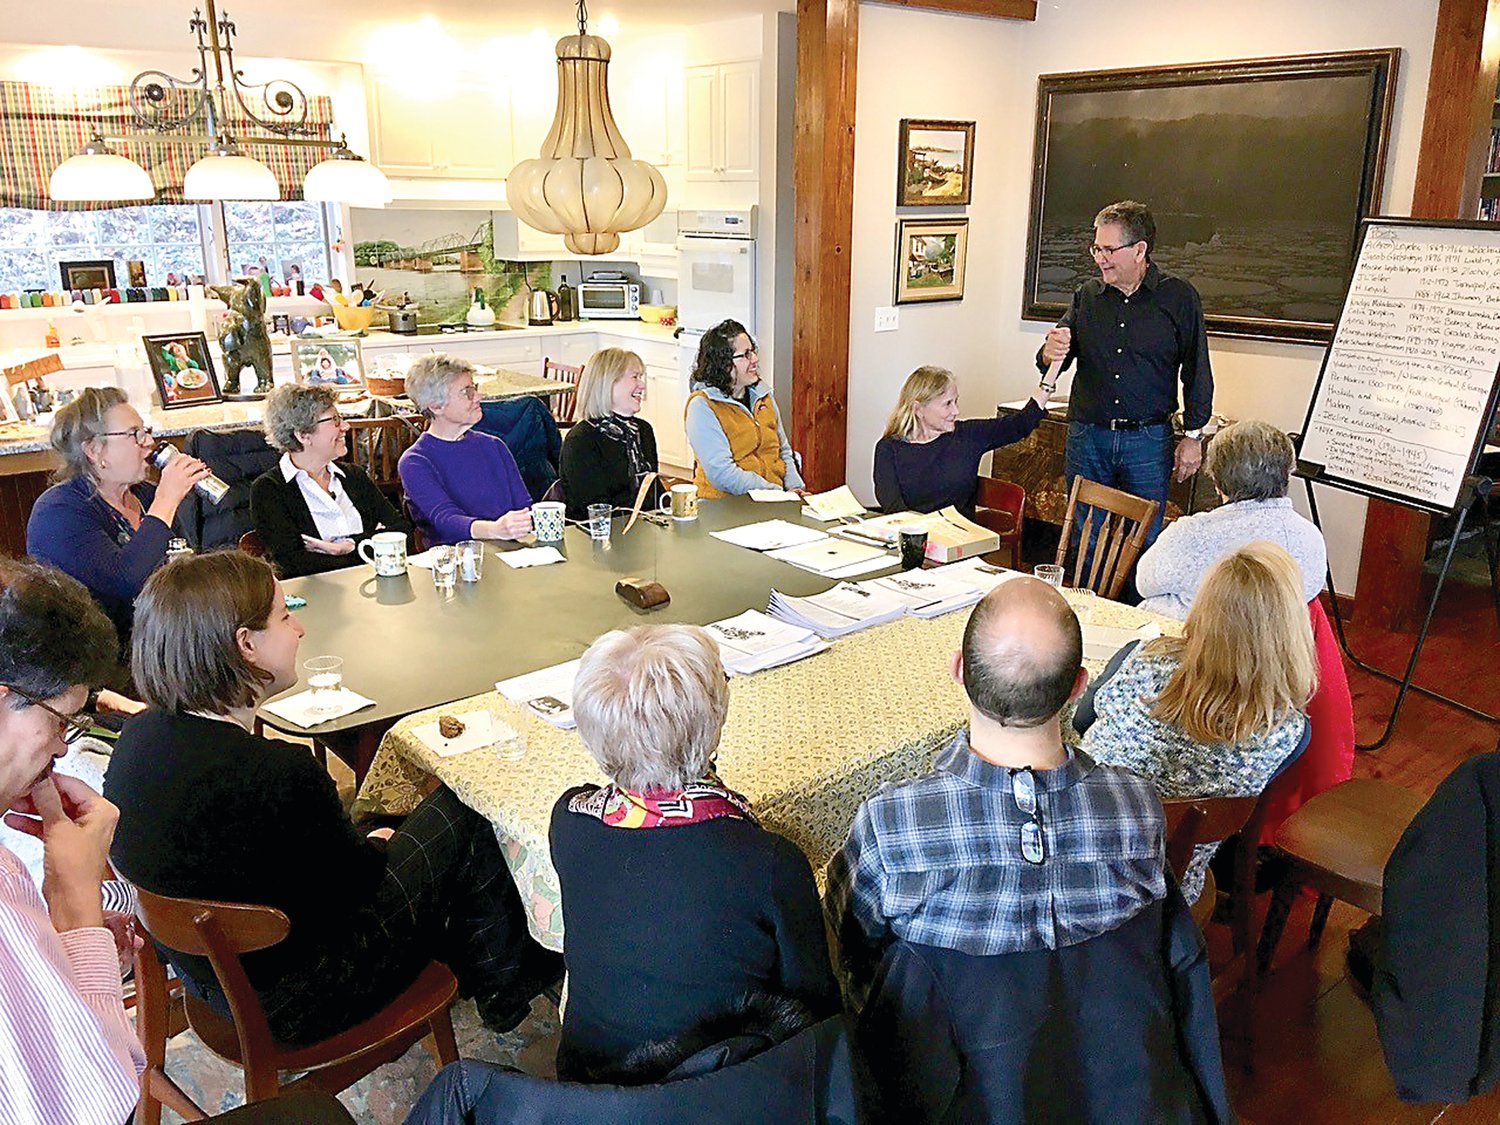 David Stoller, leads a class at his house on “The Treasures of Yiddish Poetry.”